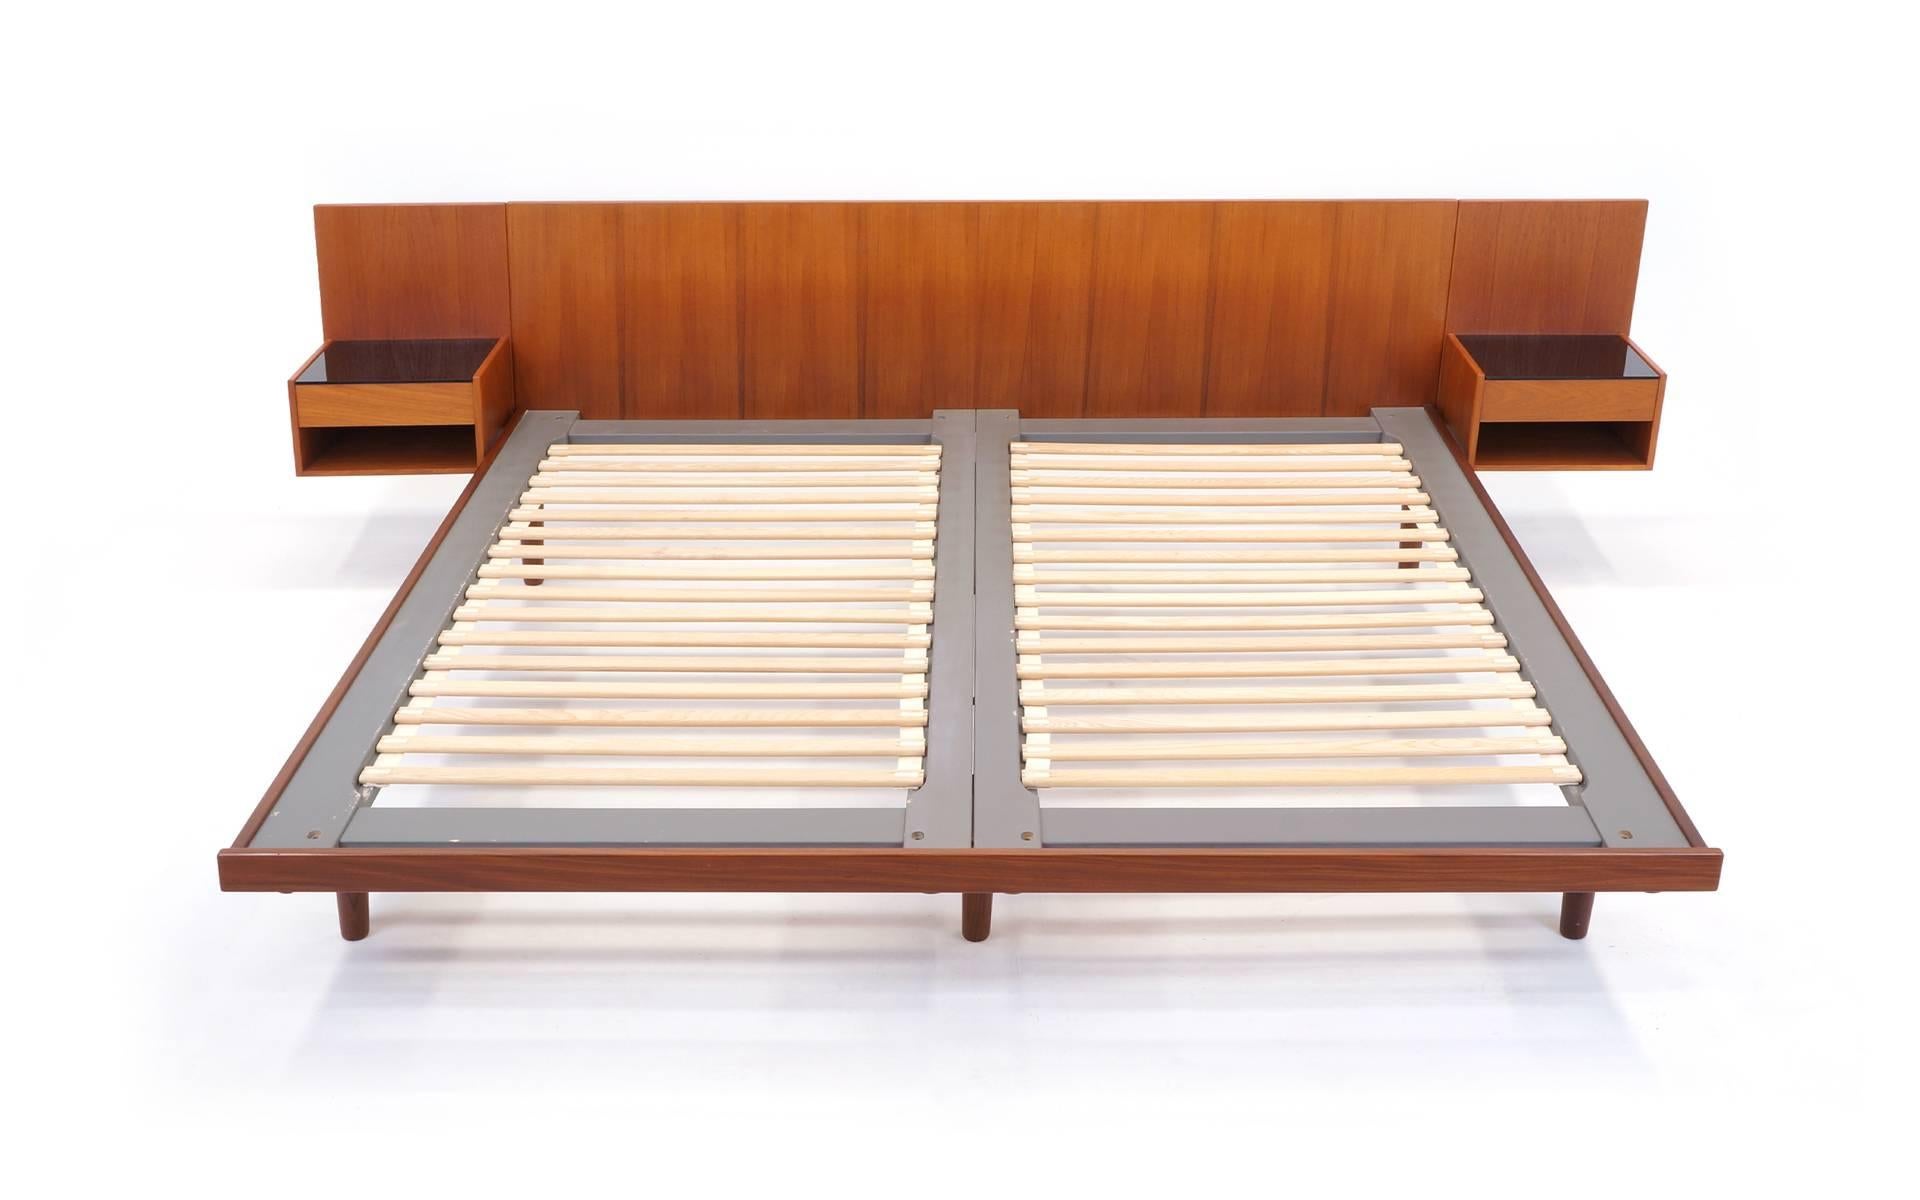 Exceptional and rare king-size bed frame designed by Hans Wegner and made by GETAMA, Denmark. Teak with textured black glass tops on the night stands. Excellent all original condition. Please use the contact dealer button if you have any questions.